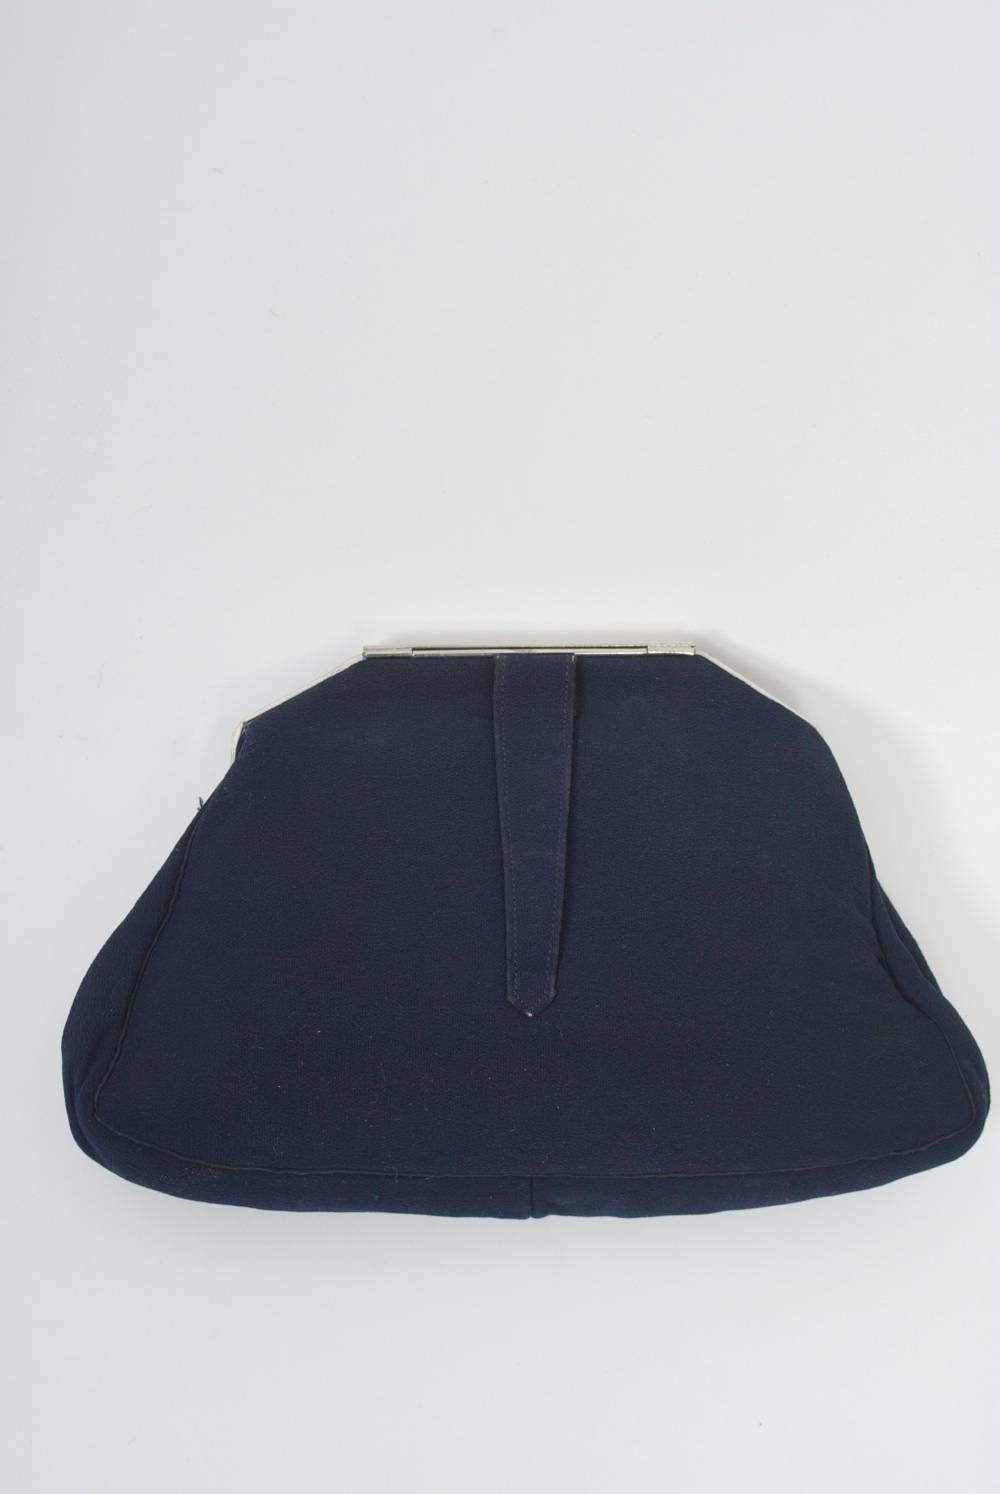 Evening clutch in navy silk featuring a silver metal frame and clasp, the latter quarter-moon shaped cut metal, the rounded edge framed in small rhinestones. A loop handhold is on the reverse of the clutch. The matching interior has an open side